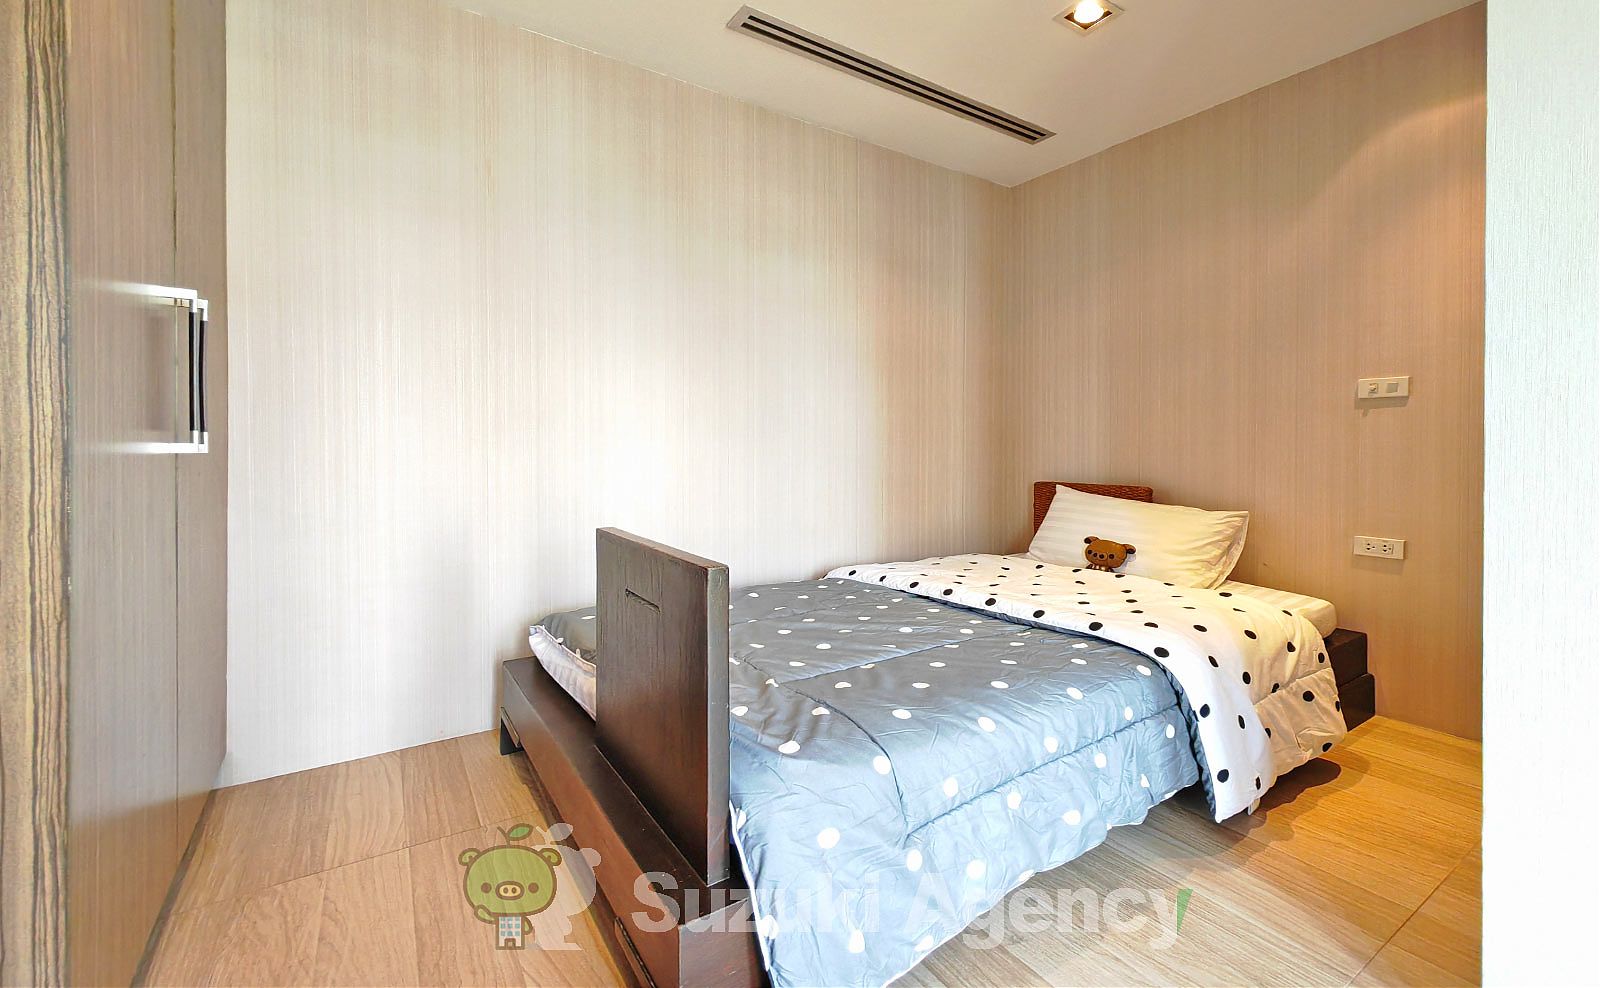 W 8 Thonglor 25:3Bed Room Photos No.10